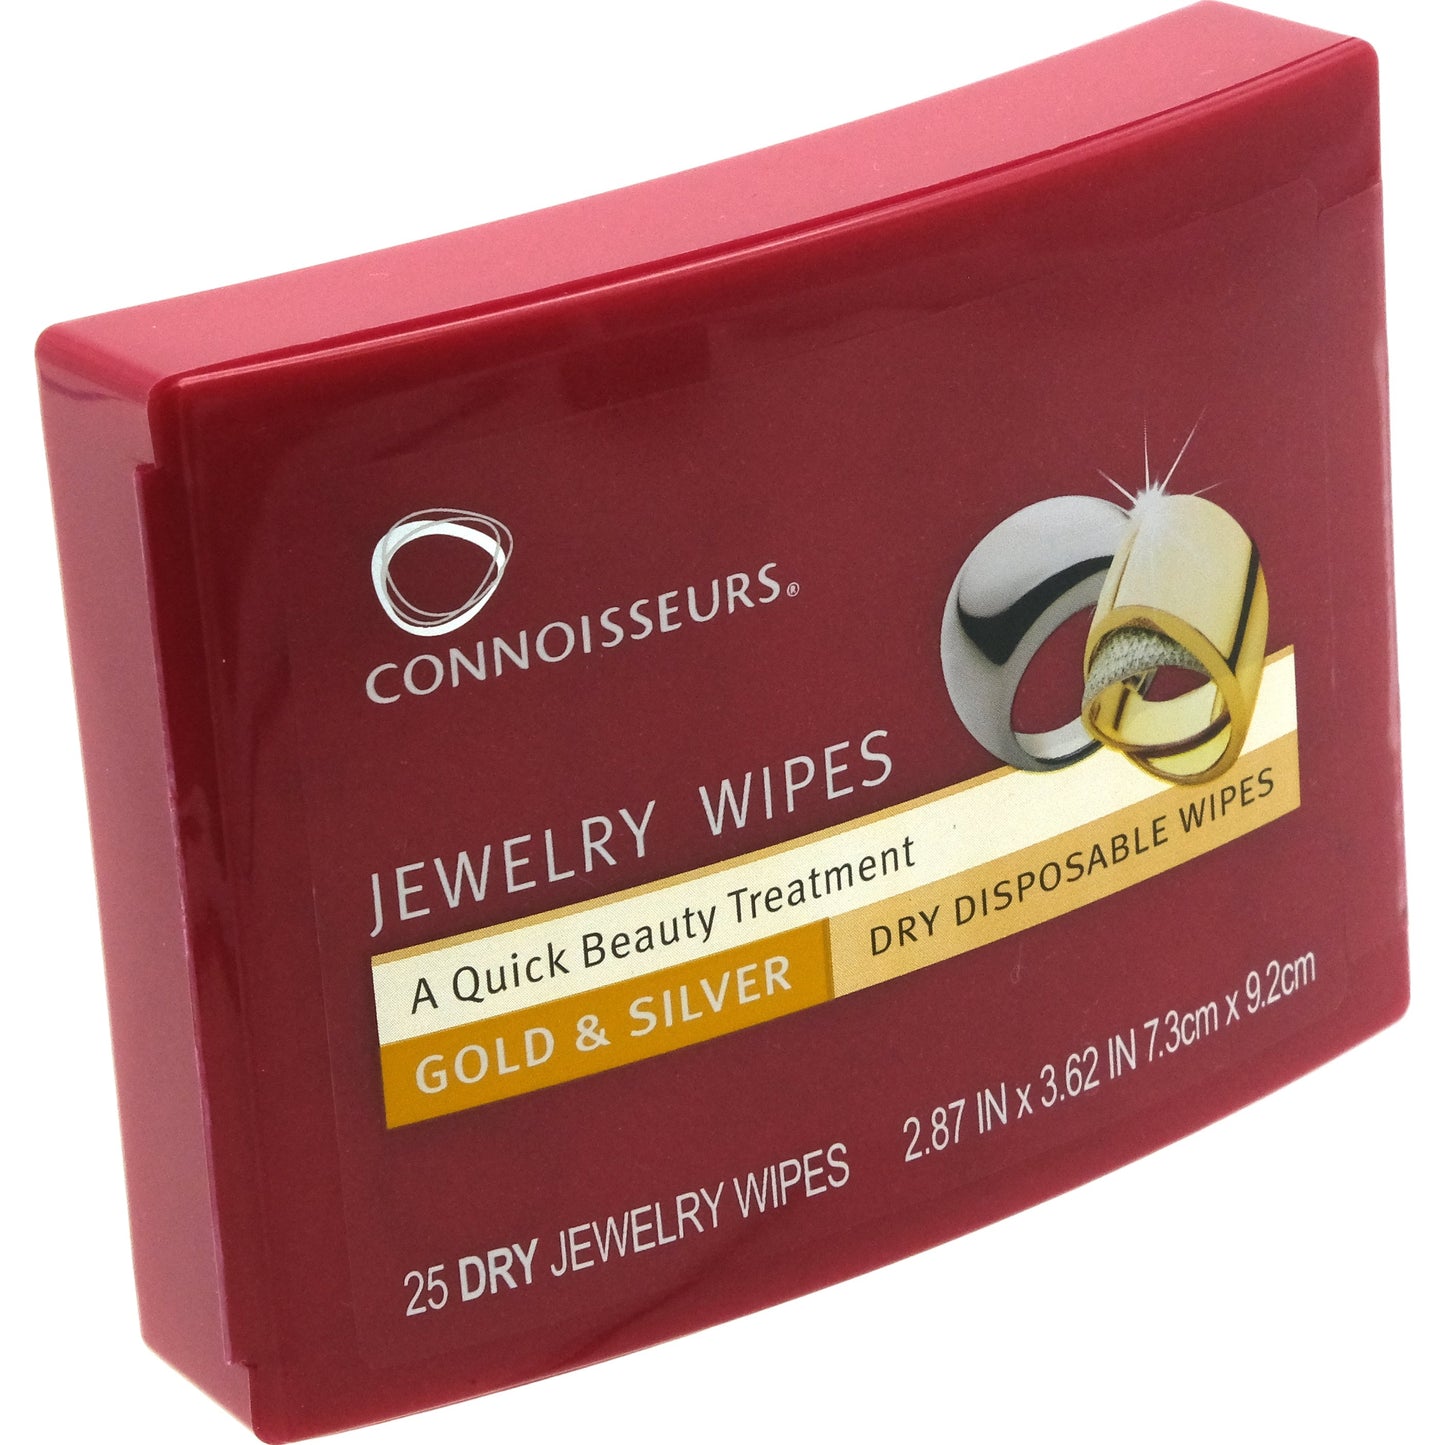 Connoisseurs Jewelry Wipes 600 Wipes